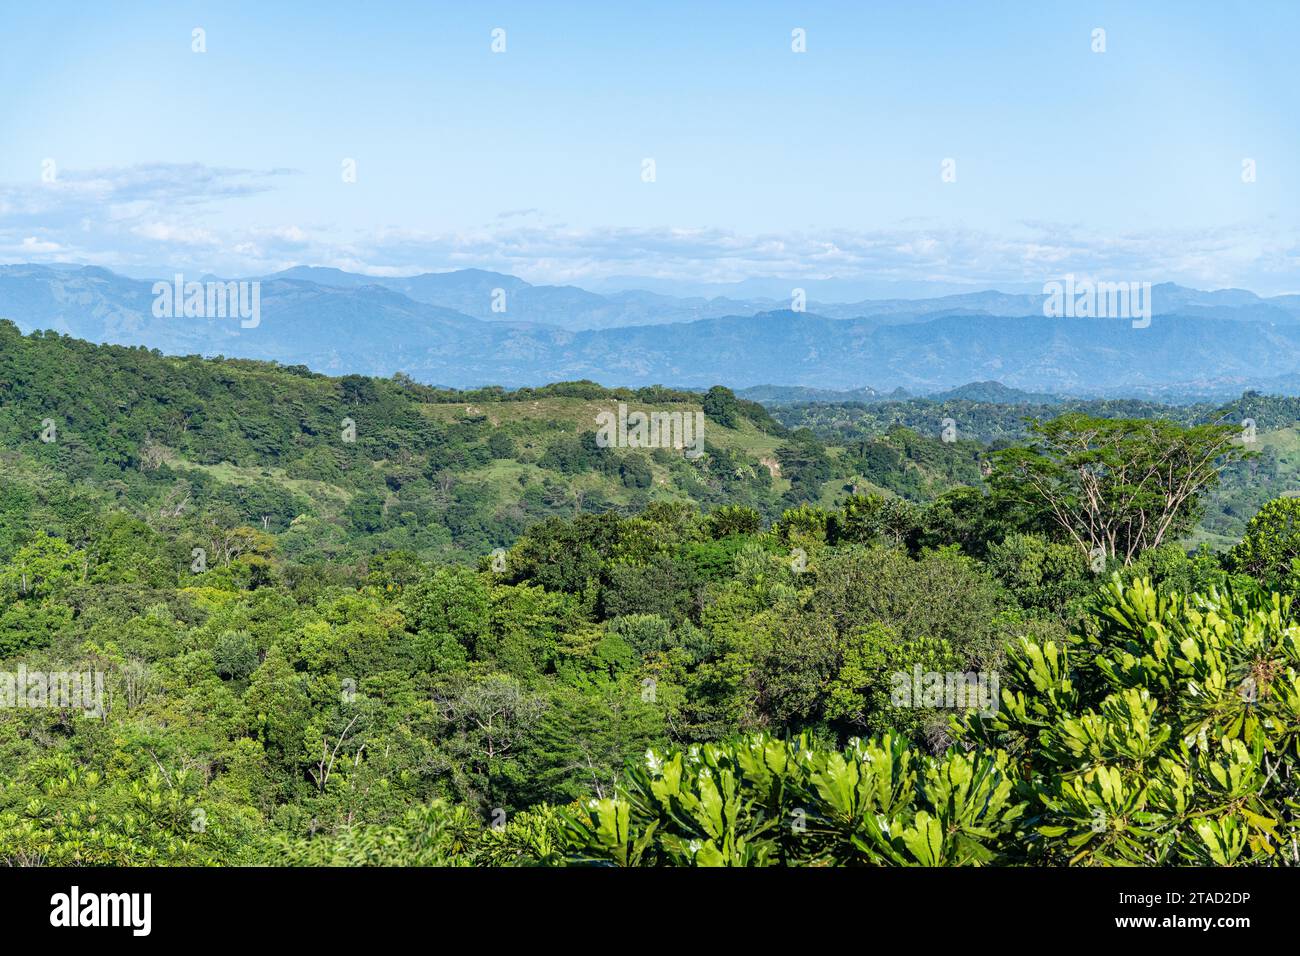 A view of the Colombian countryside forests, jungles and mountains Stock Photo